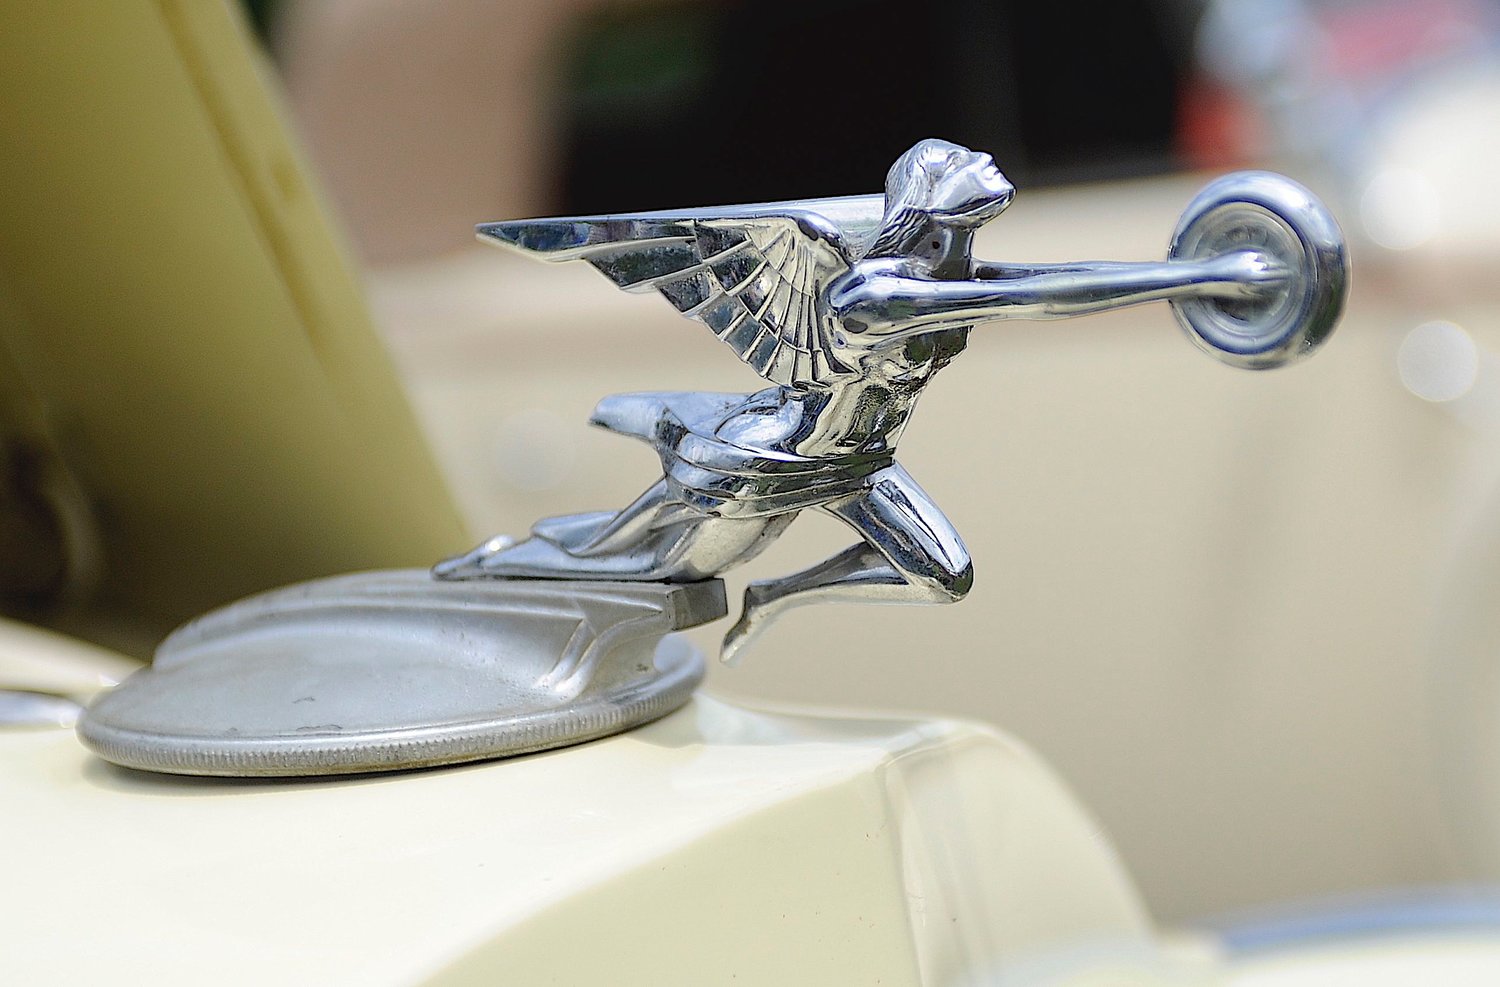 Adonis in chrome. Werner H.A. Gubitz designed the iconic radiator cap ornament gracing the Kehrleys’ immaculate ’35 Packard.